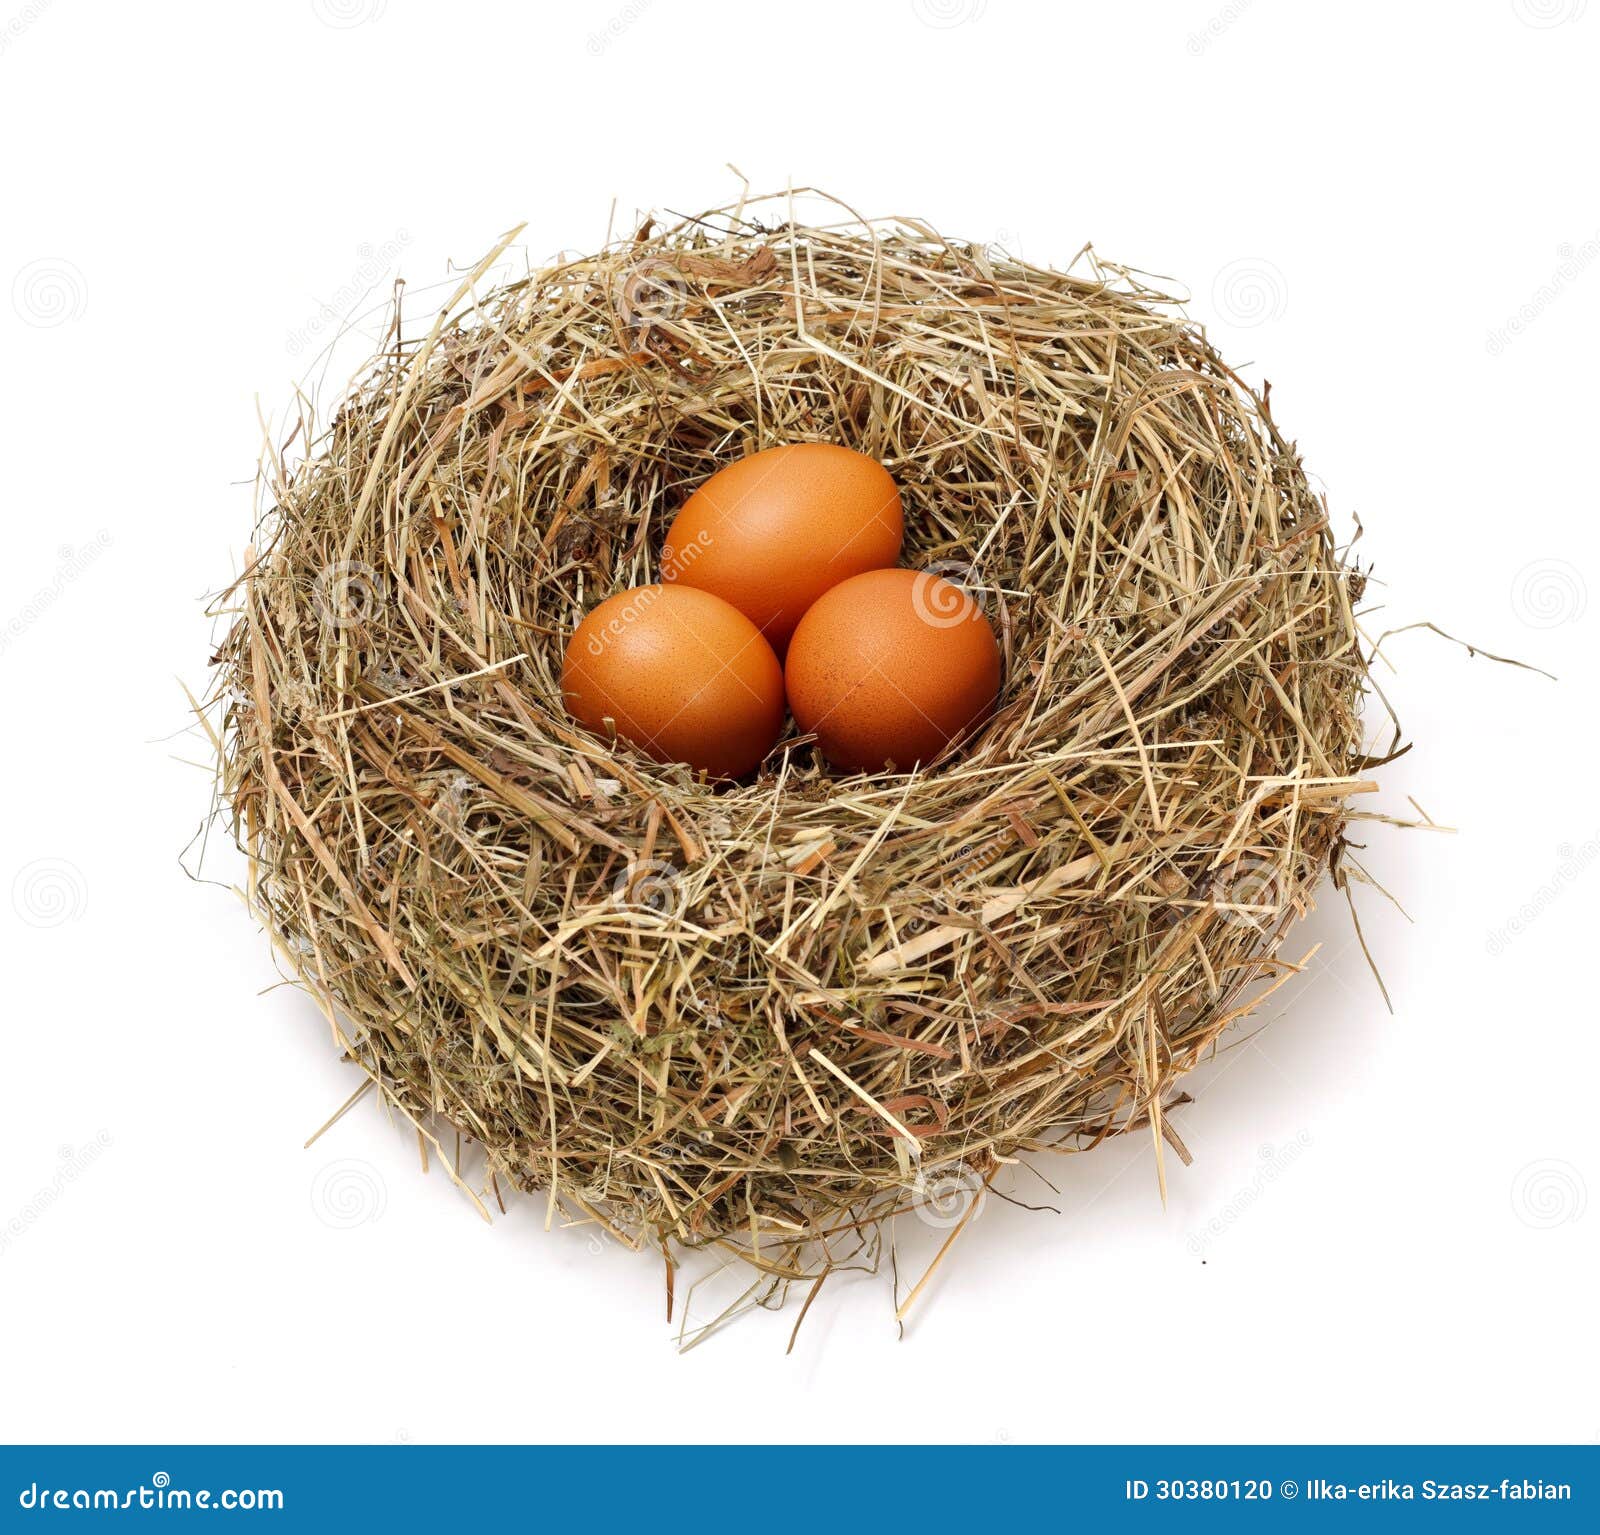 Chicken Brown Eggs In Nest Stock Photo - Image: 30380120